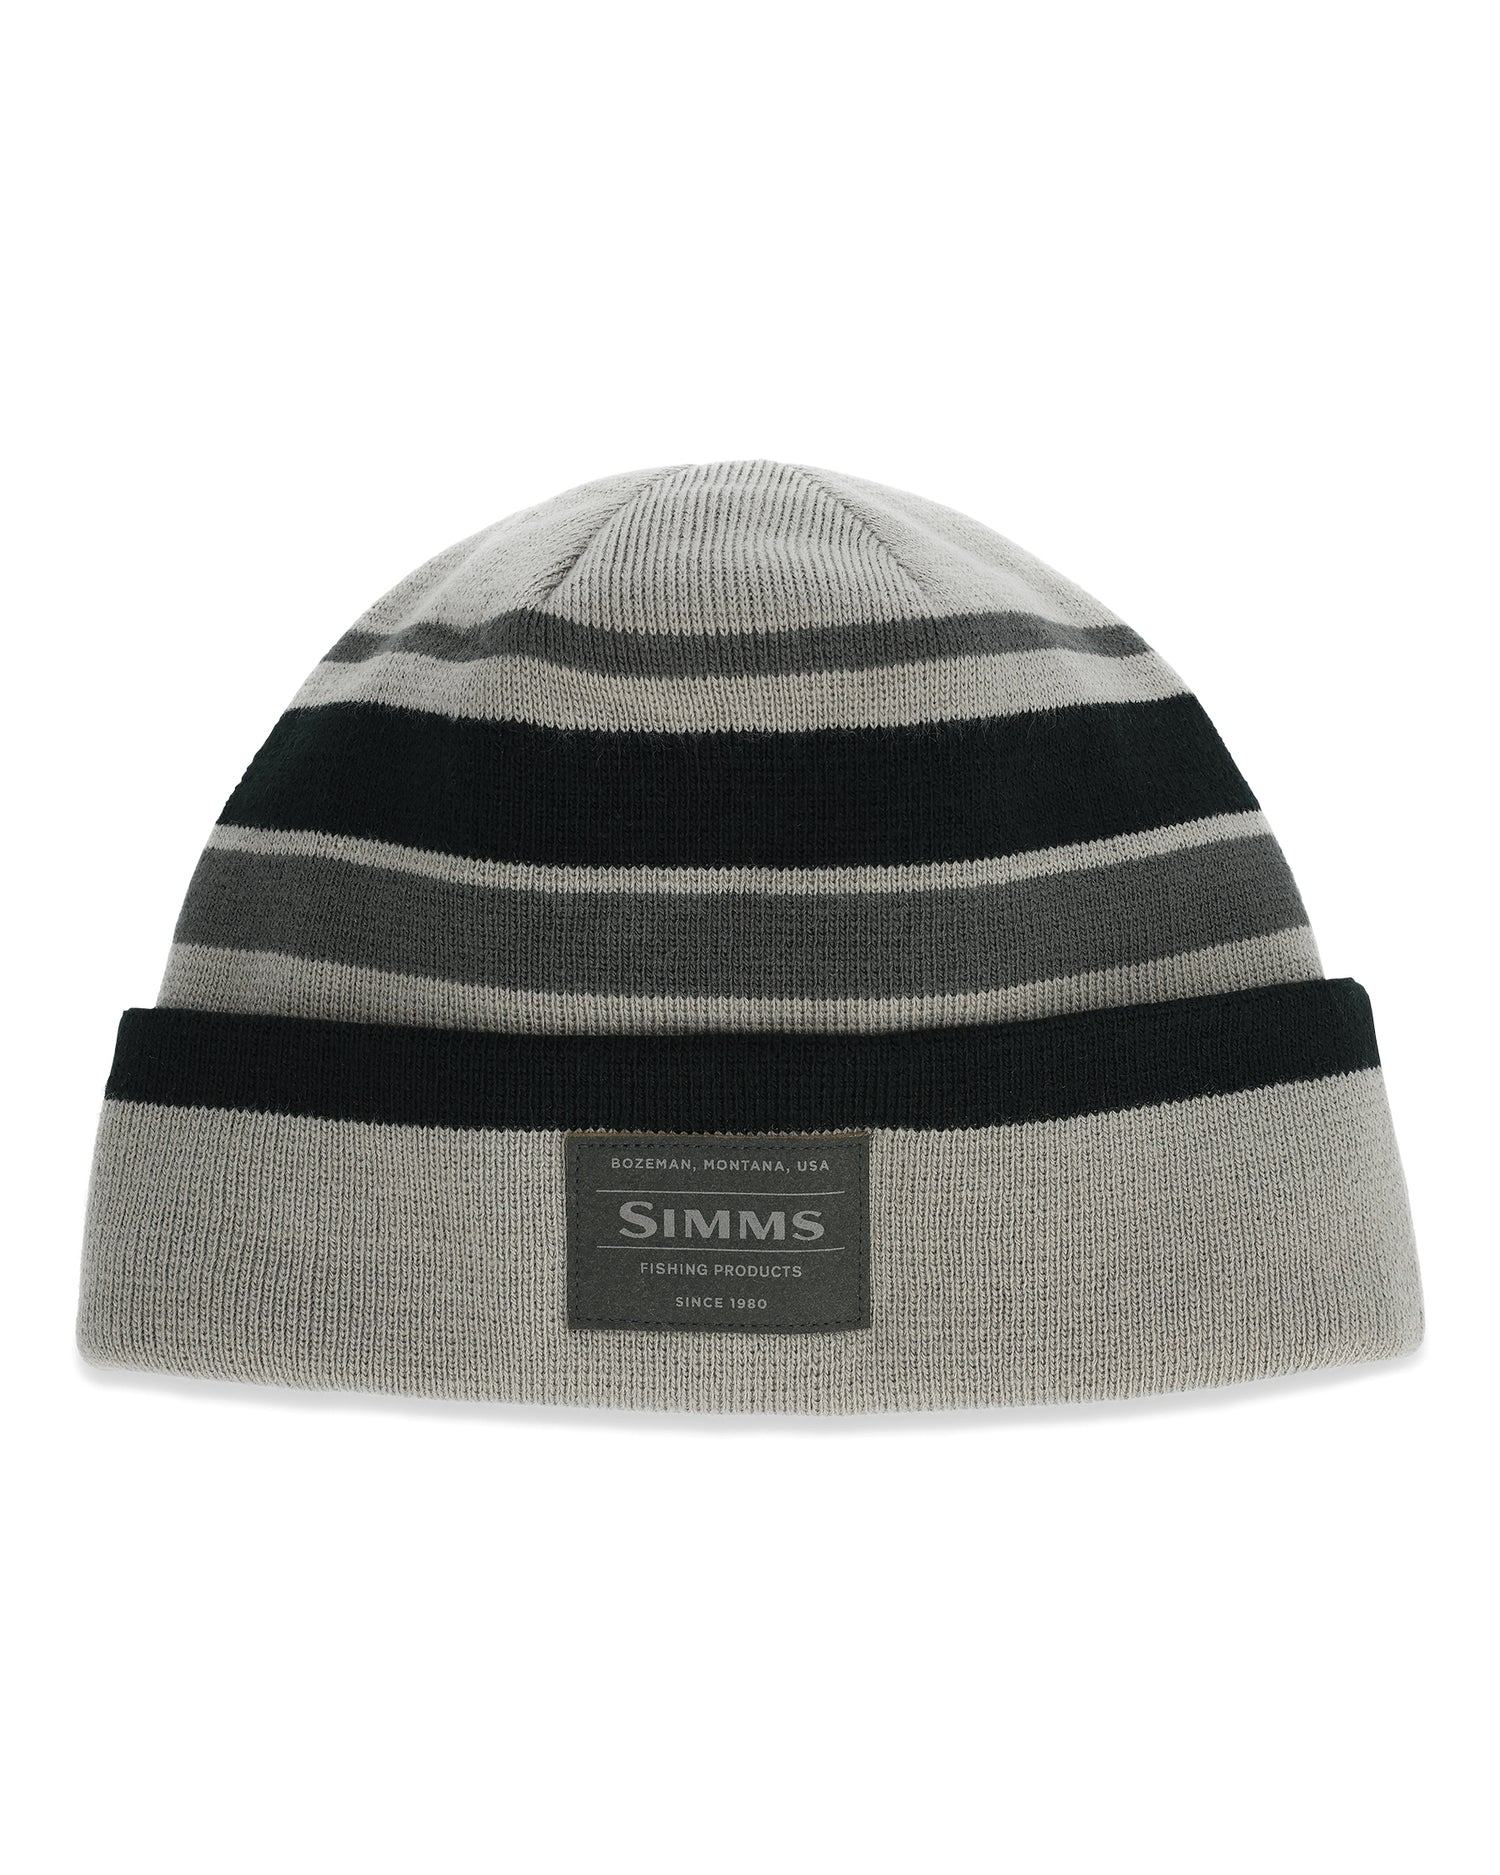 13805-040-Windstopper-Beanie-Tabletop-F23-front